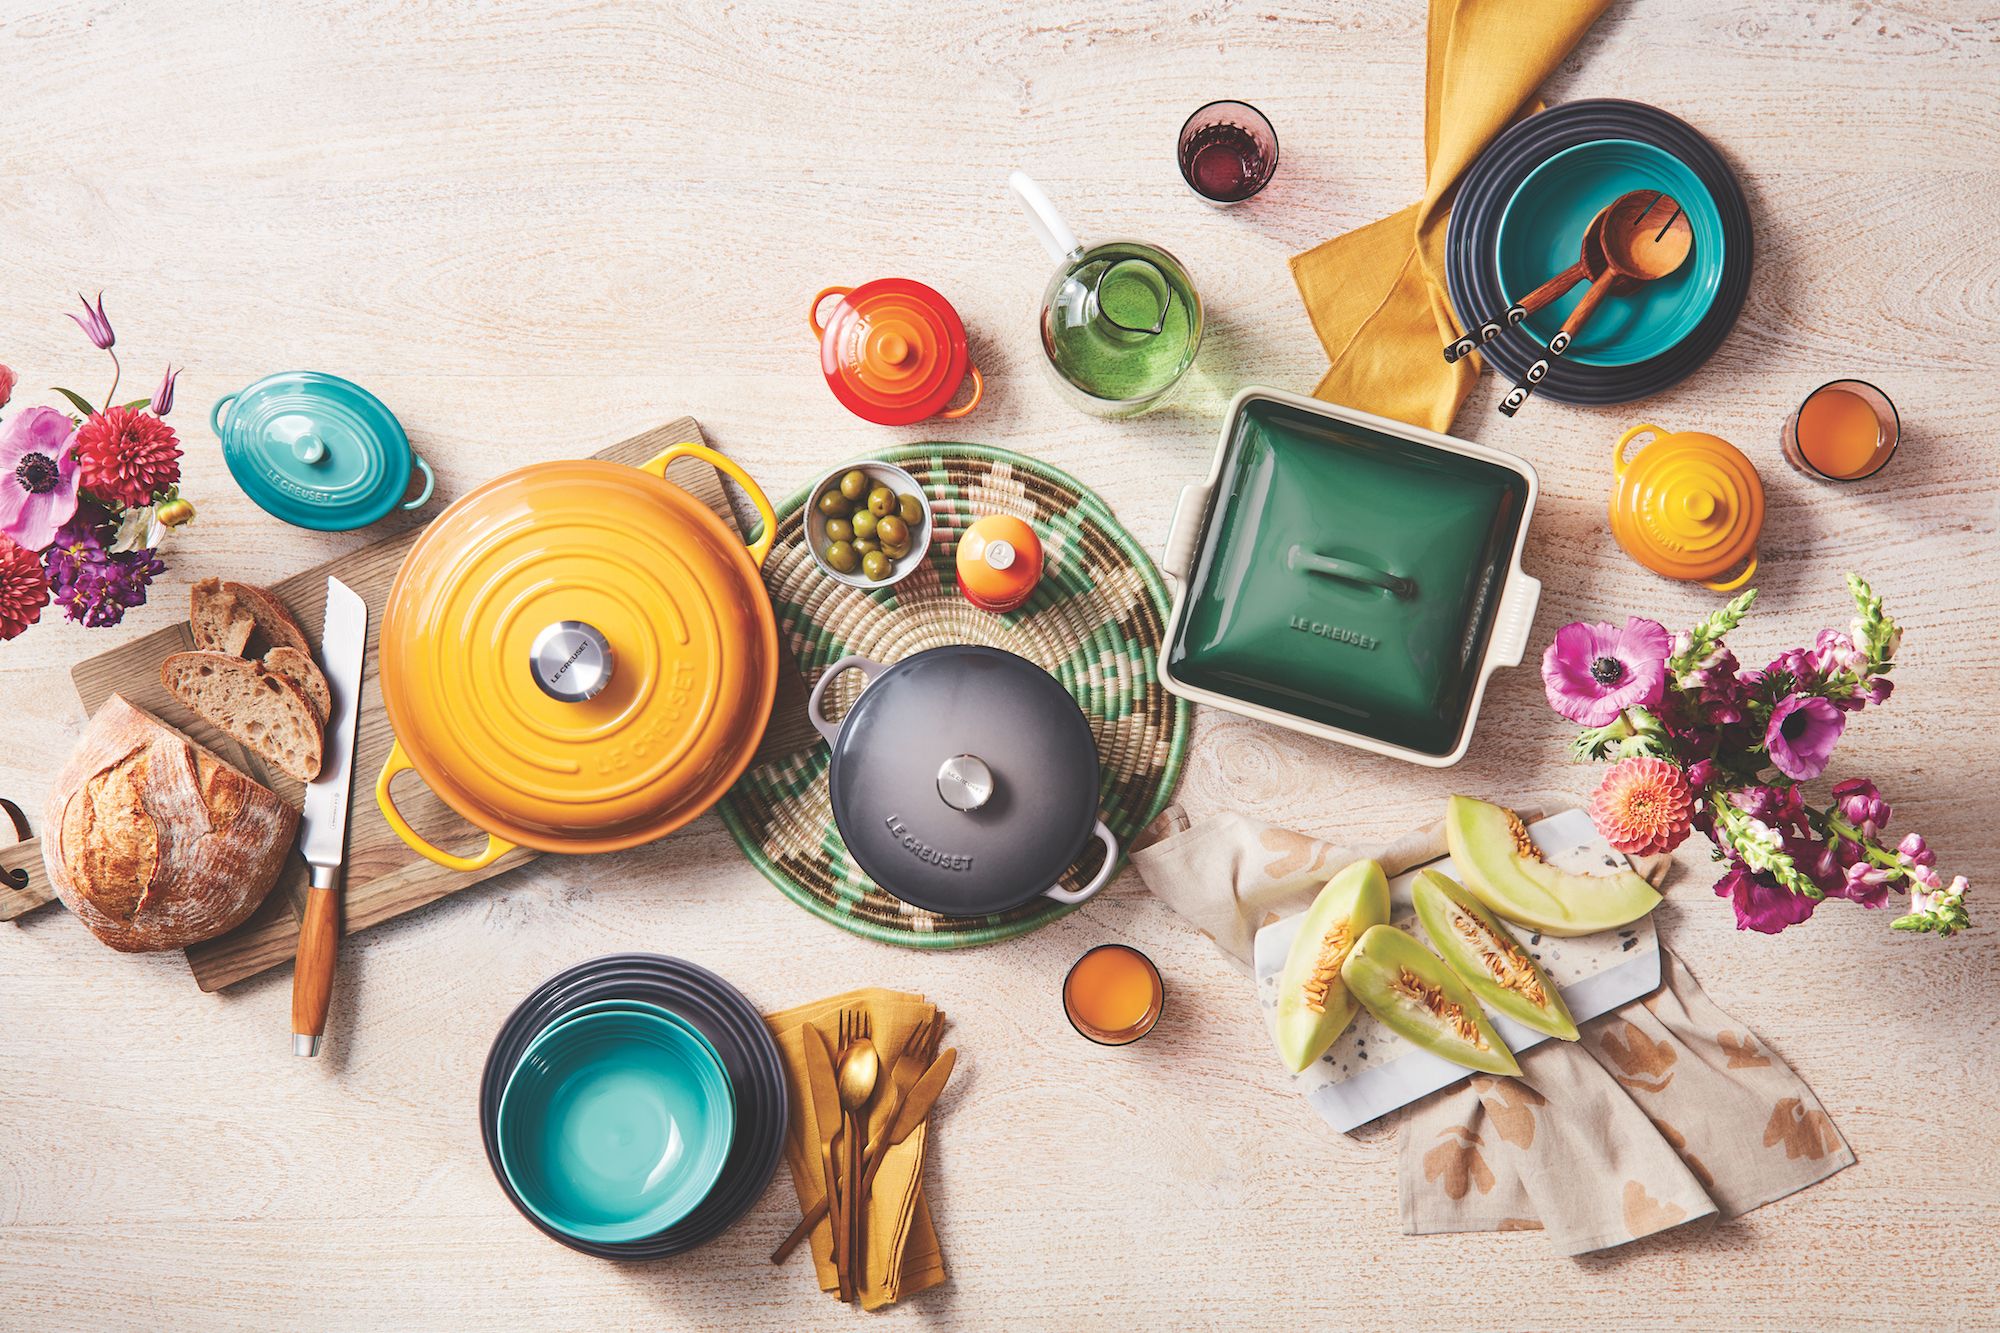 Le Creuset - All about Artichaut: This lush mood board was our top